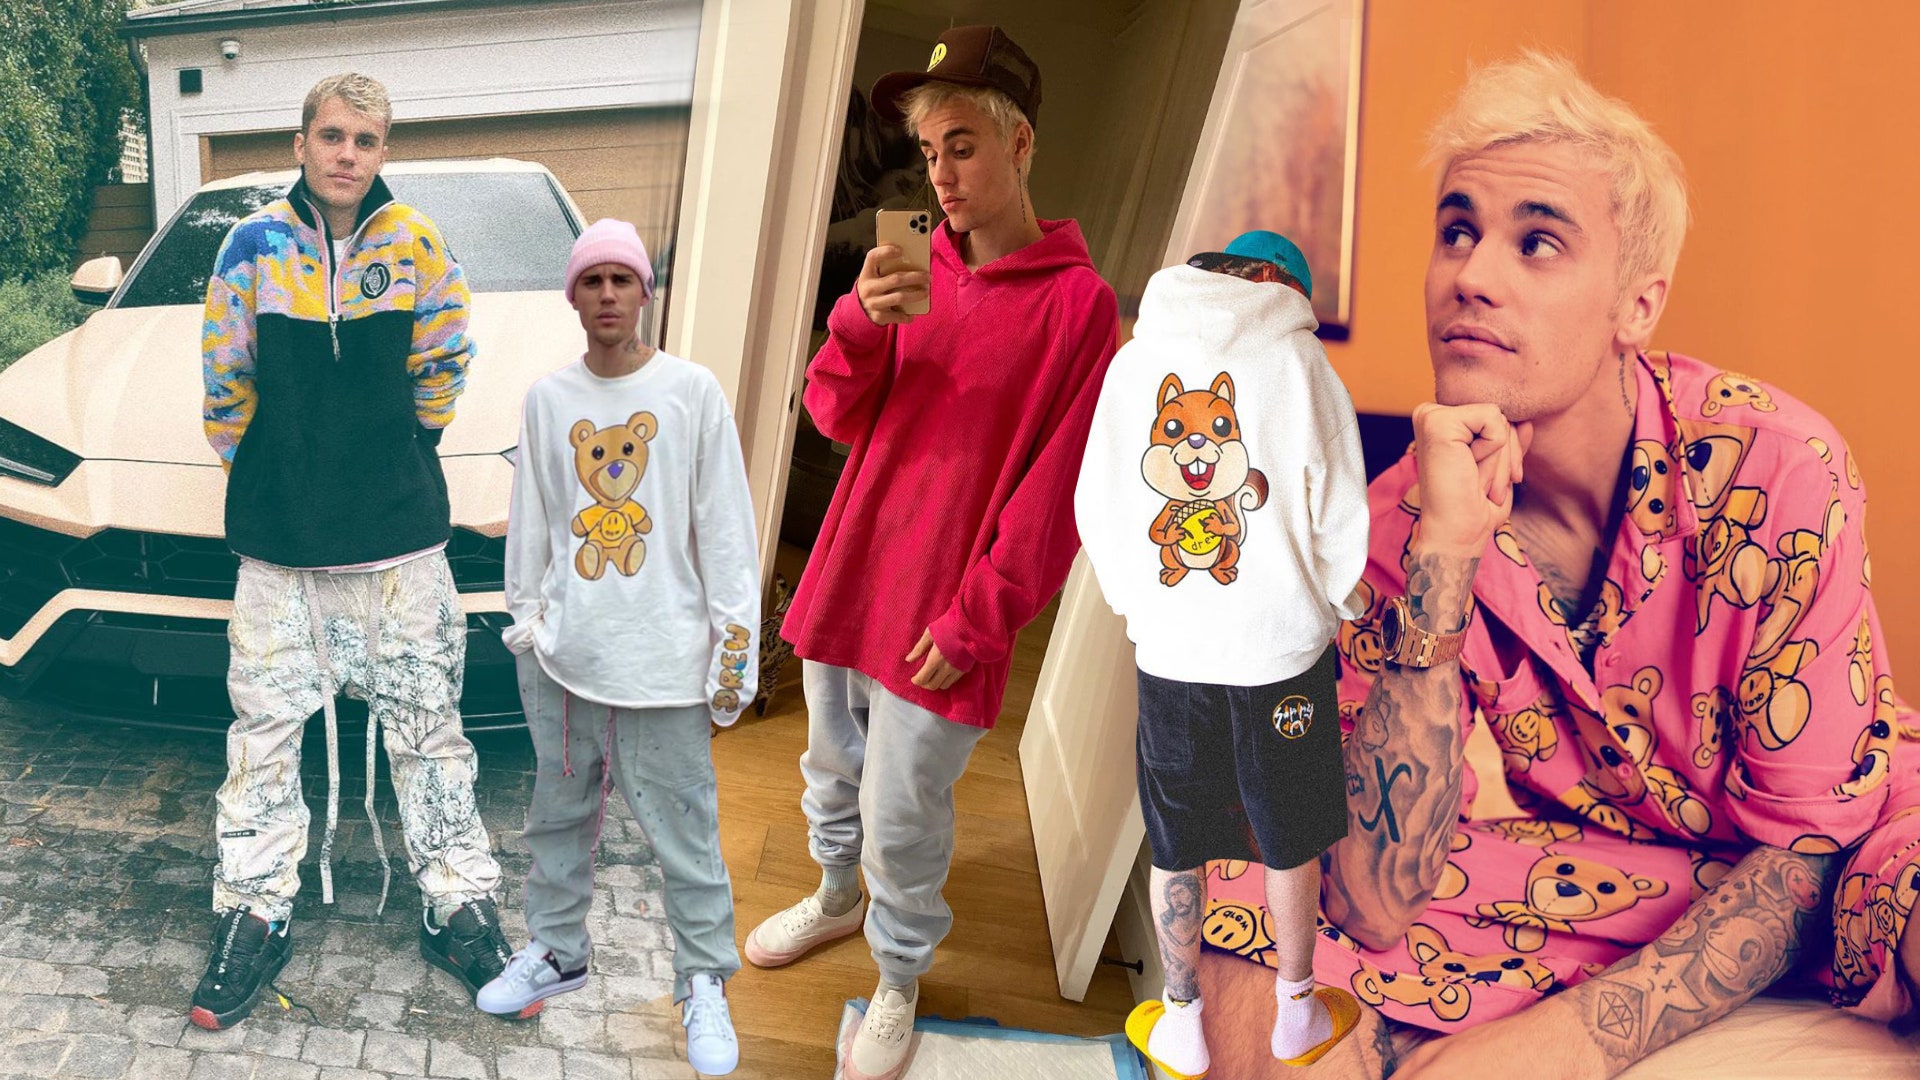 Dressing up like justin bieber is a genuine street style?